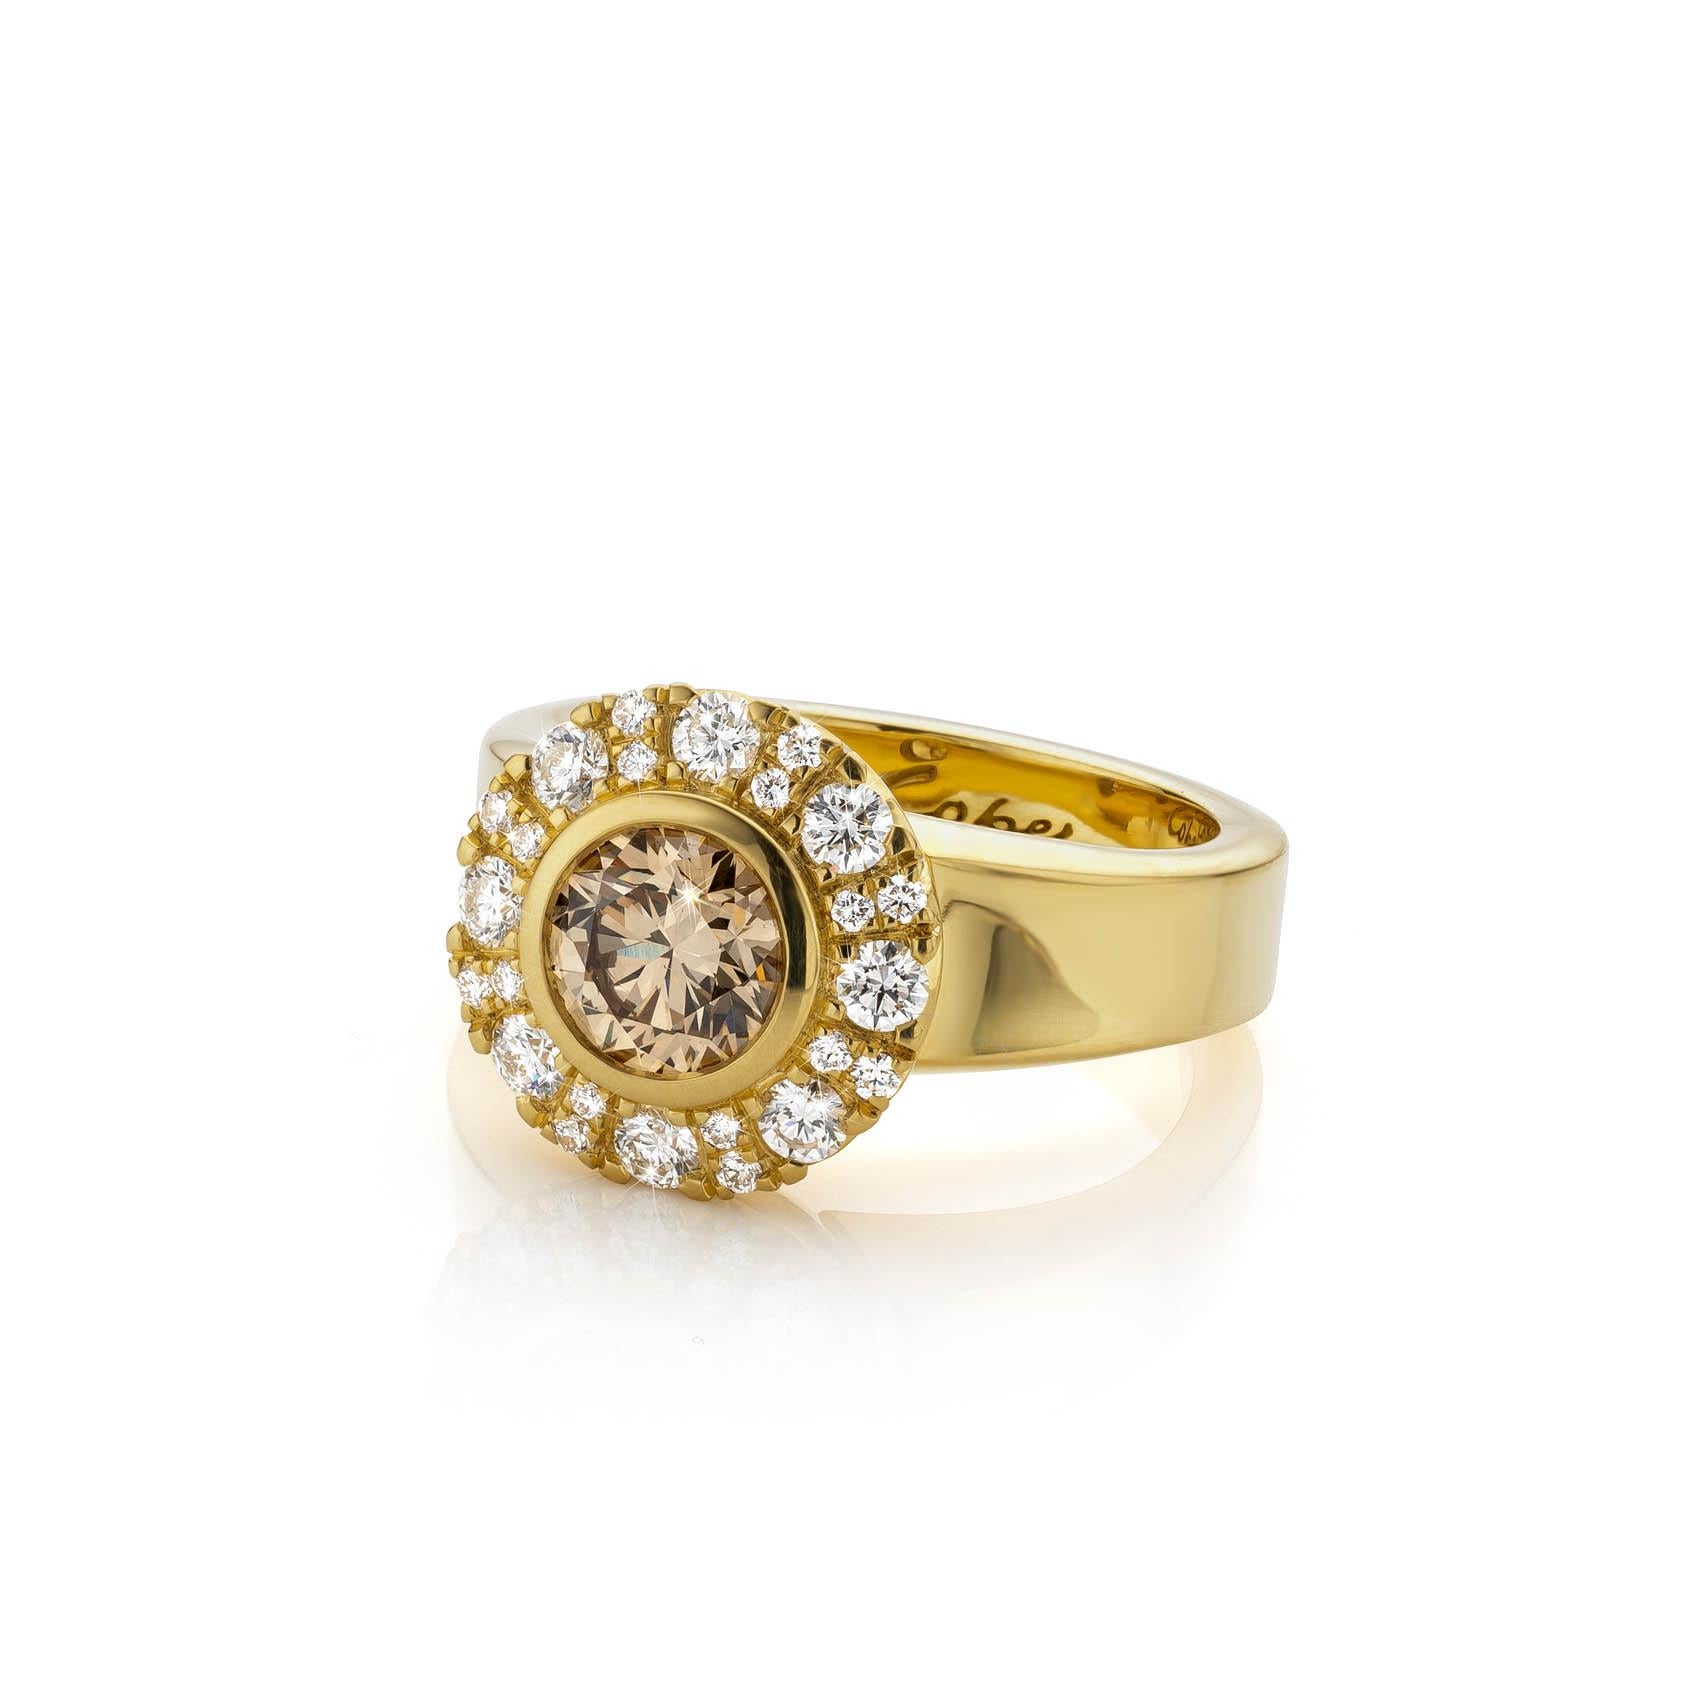 Brilliant Cut Cober “Engraved Cluster” with a 1.31 ct Cognac Diamond and 30 Diamonds Ring For Sale